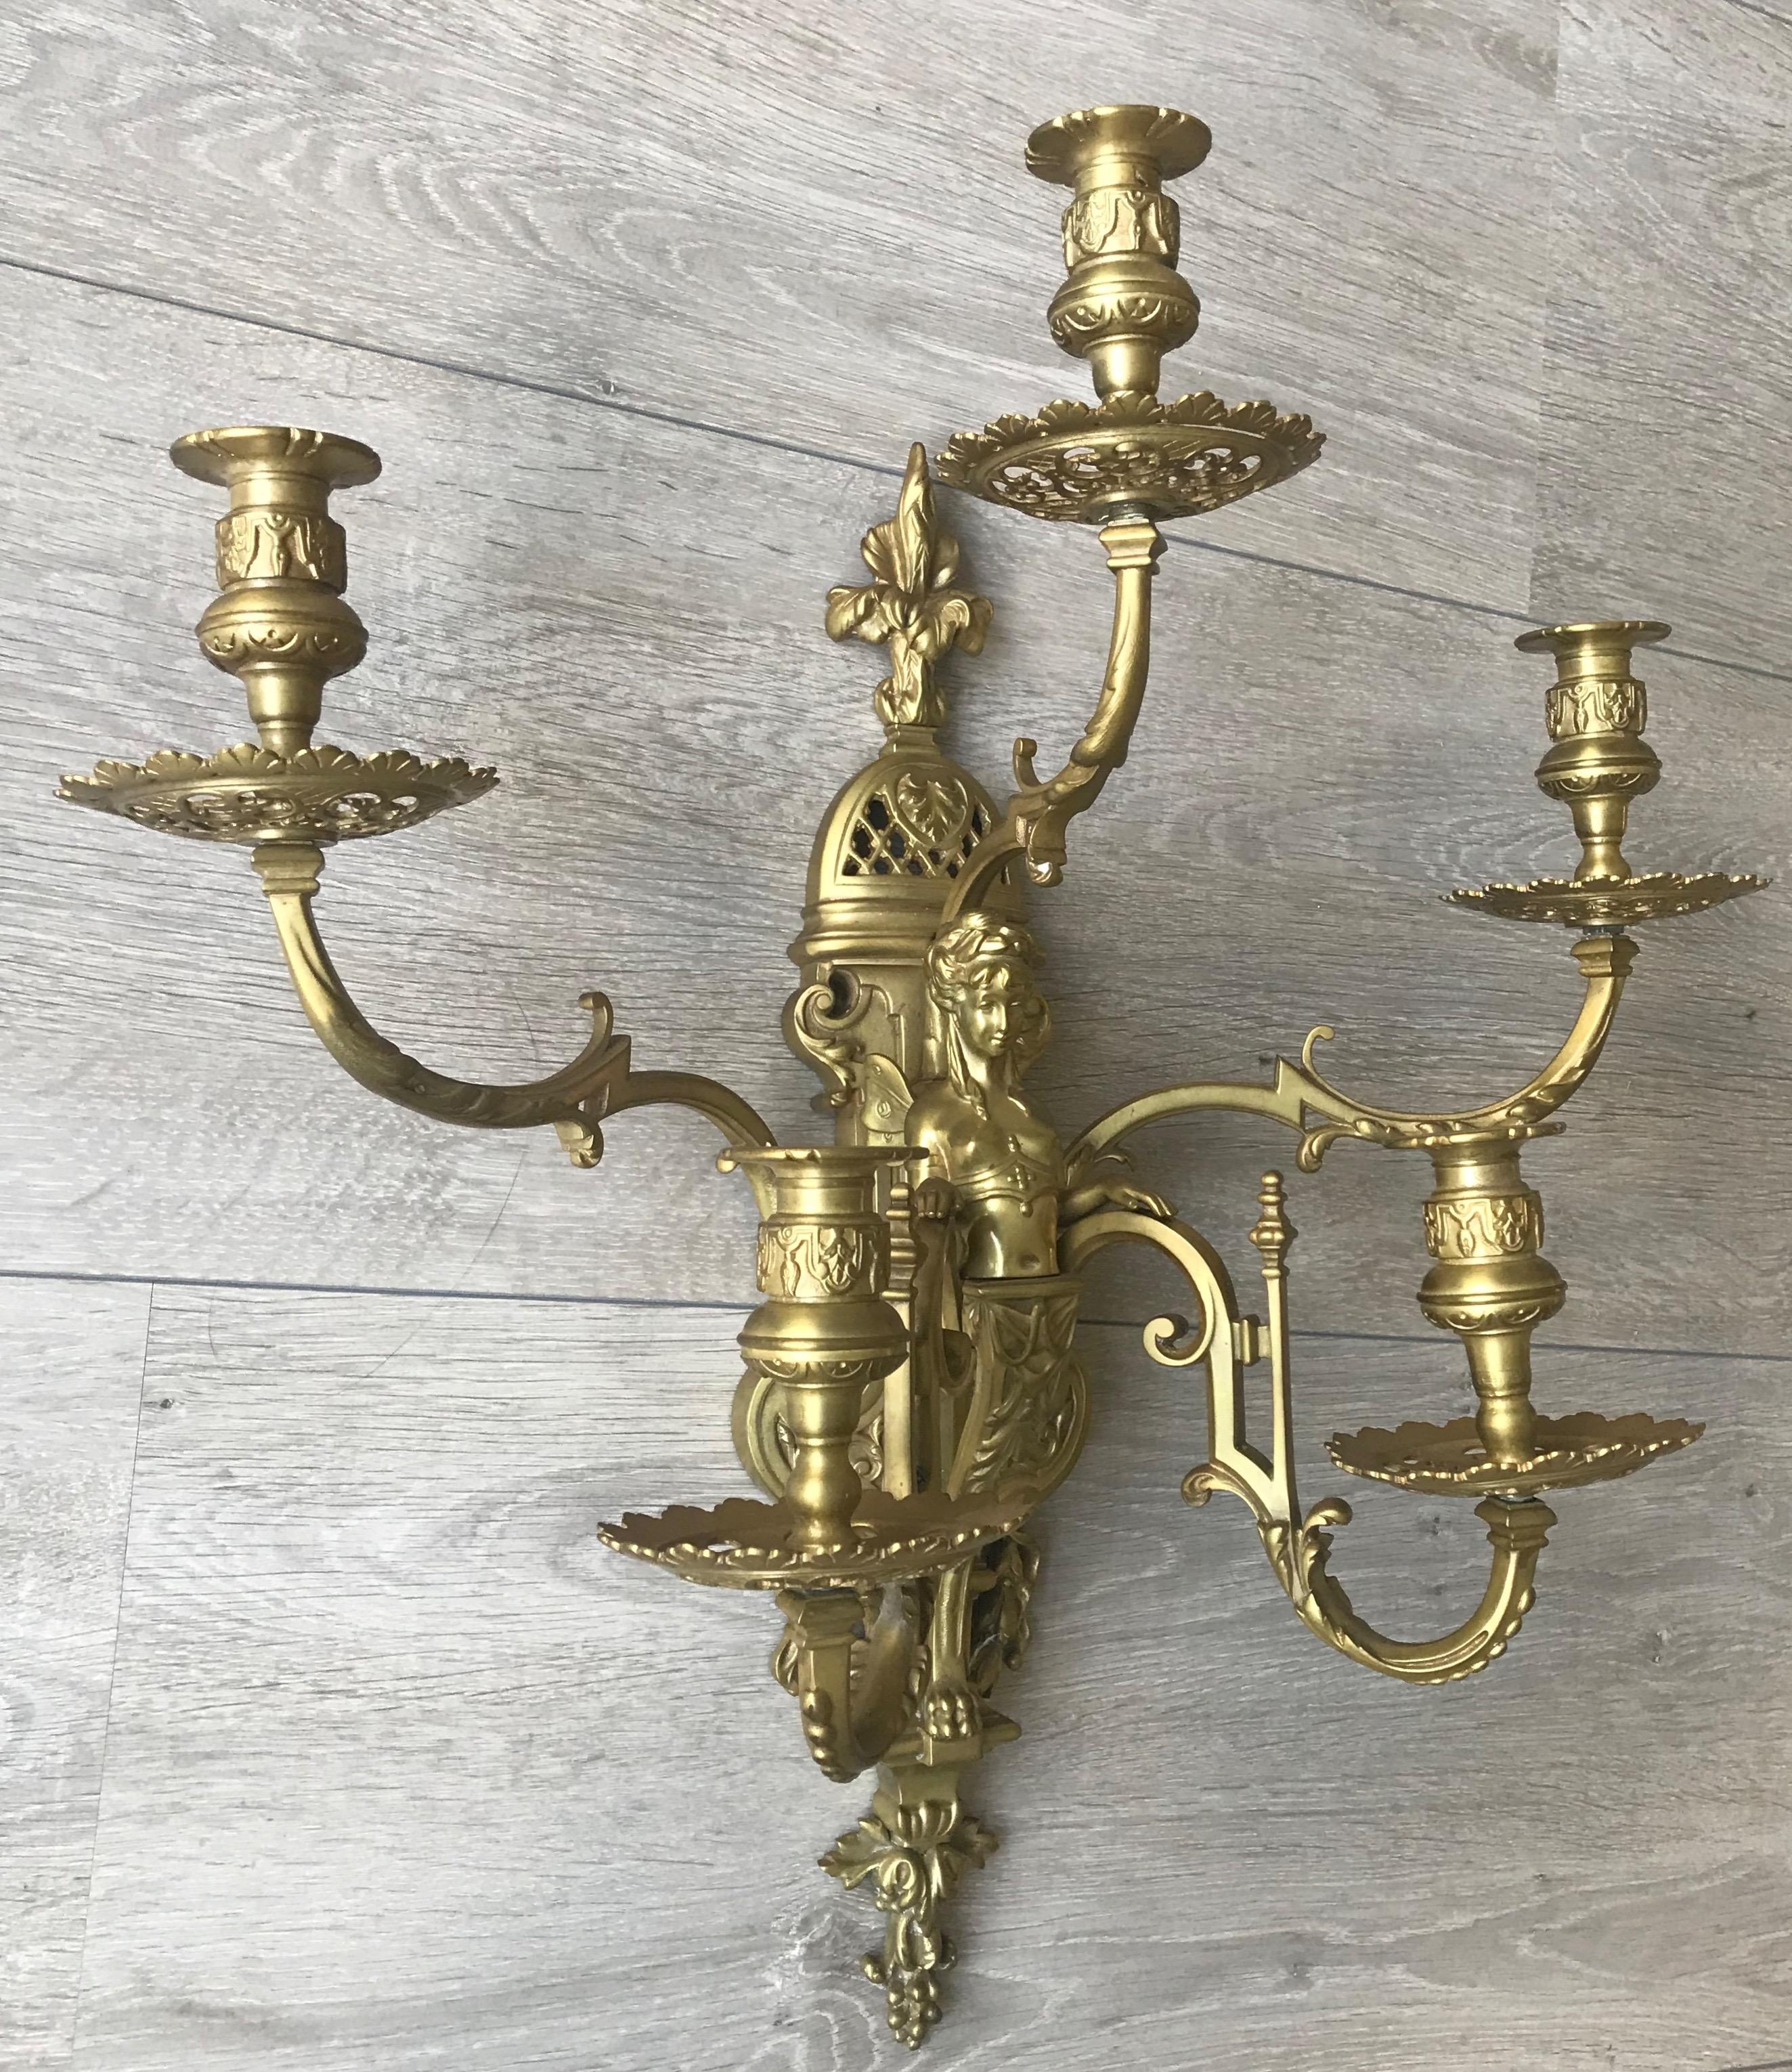 Late 19th Century Stunning & Large Antique Bronze Wall Lamp / Candle Sconce with Goddess Sculpture For Sale